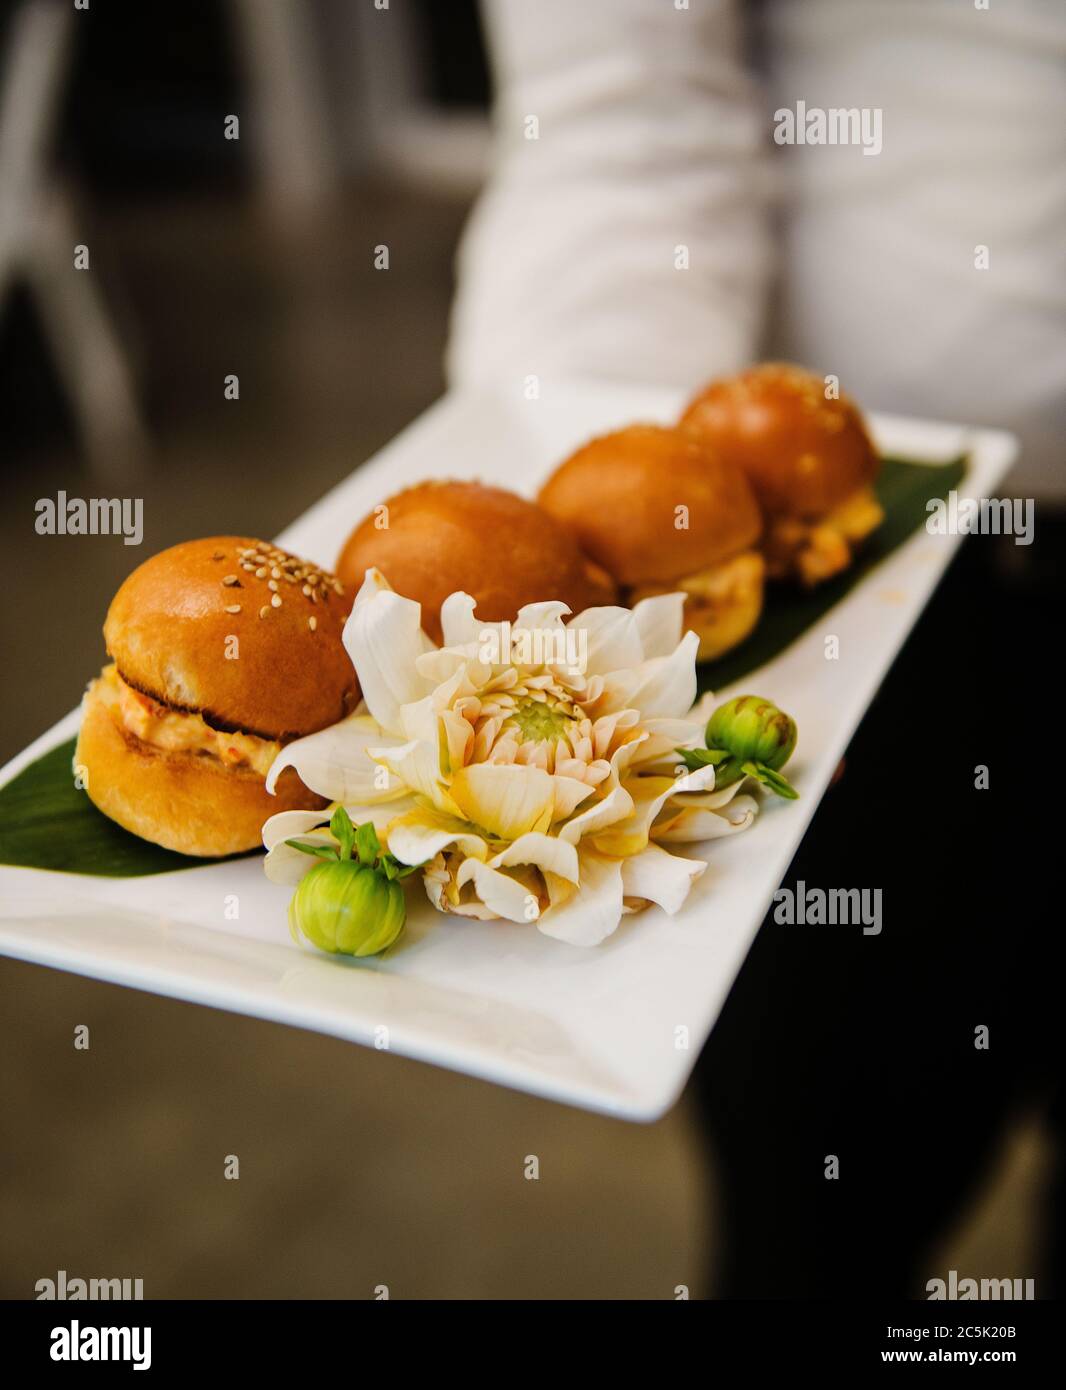 hors d'oeuvres sandwiches being served at an event Stock Photo